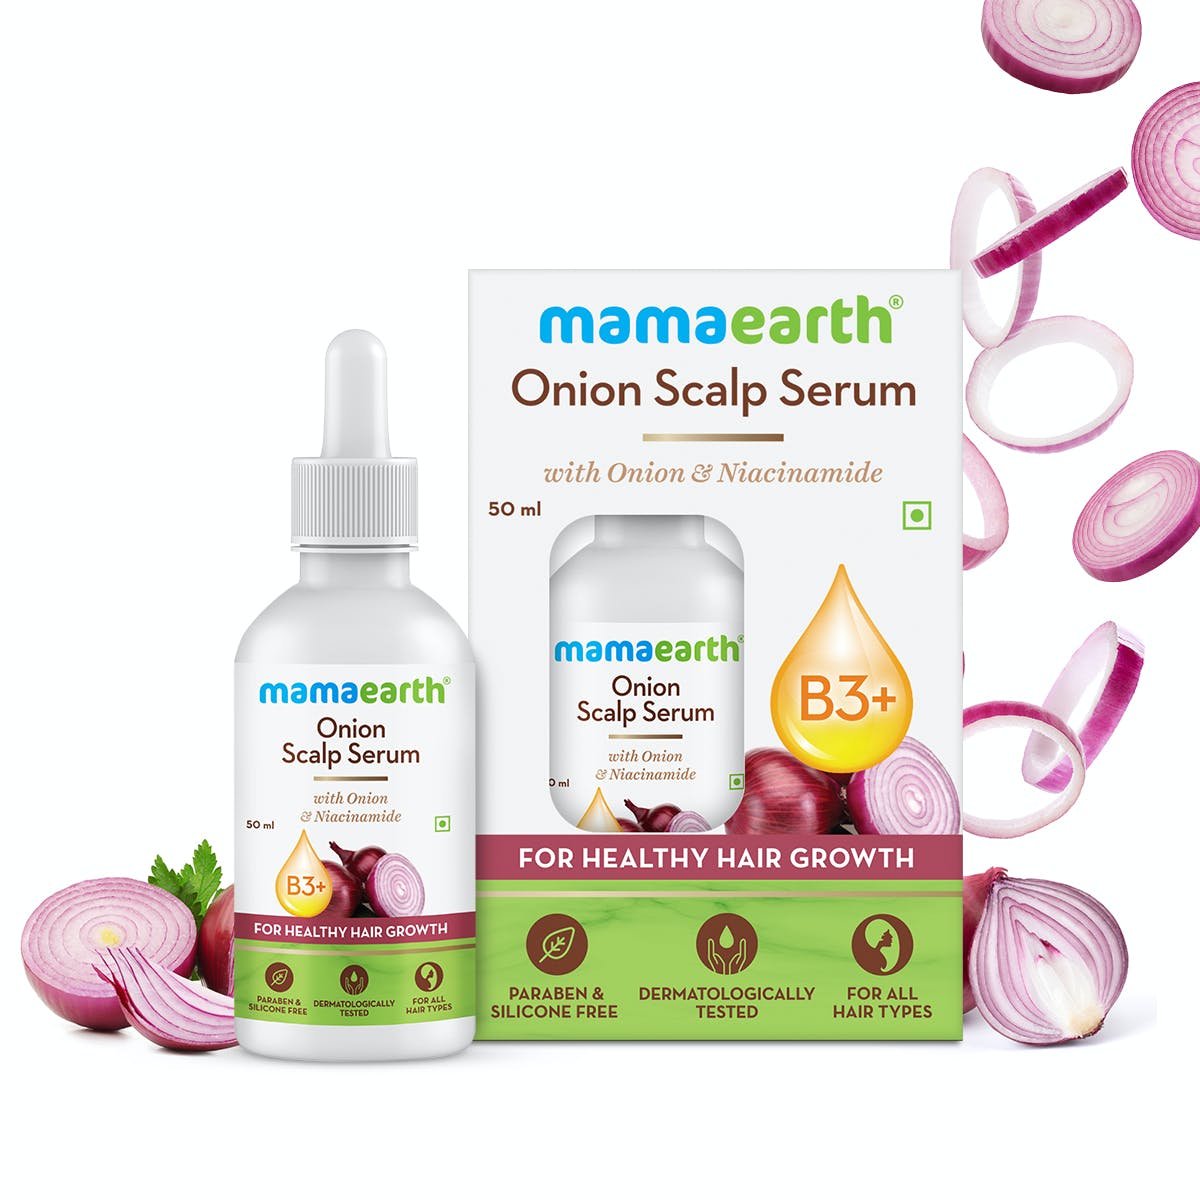 mamaearth products hair serum - Buy mamaearth products hair serum at Best  Price in Malaysia | h5.lazada.com.my